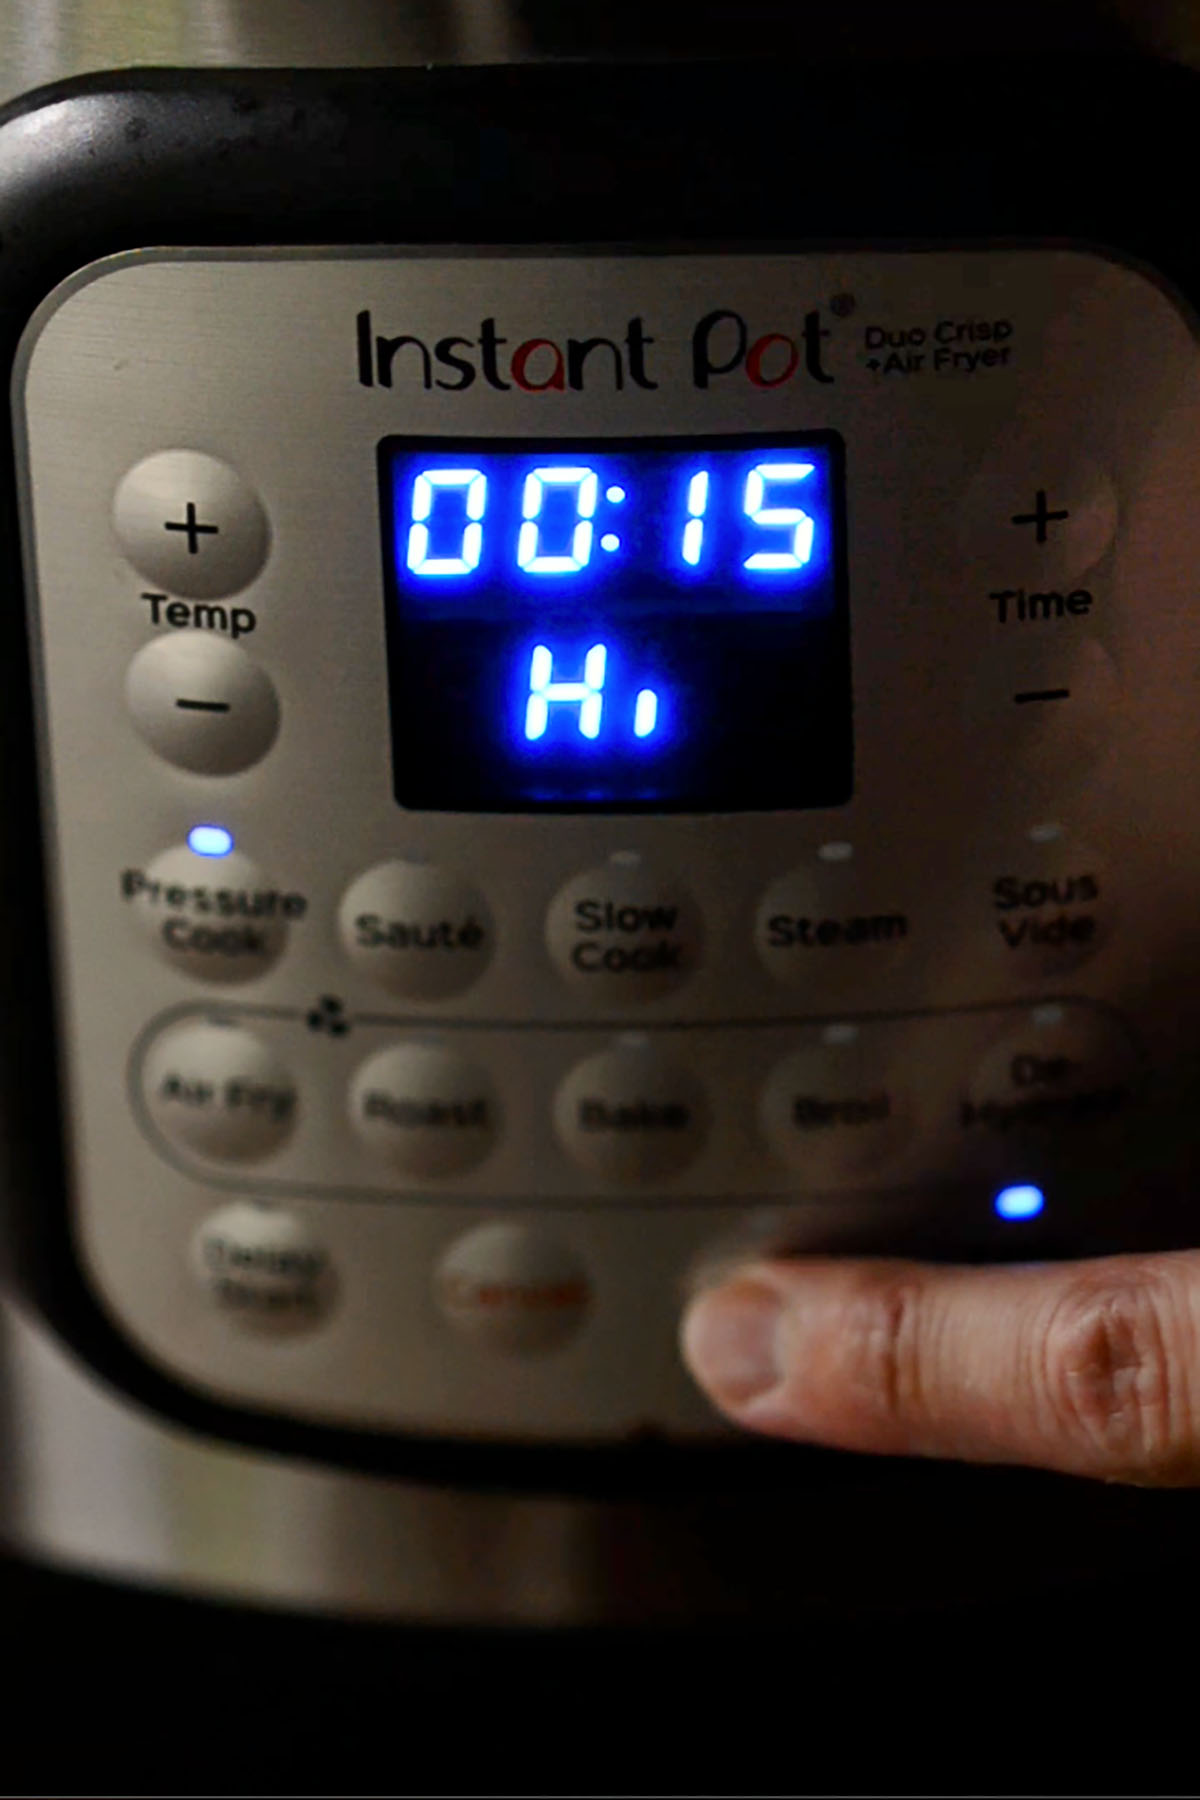 An Instant Pot set to pressure cook for fifteen minutes.